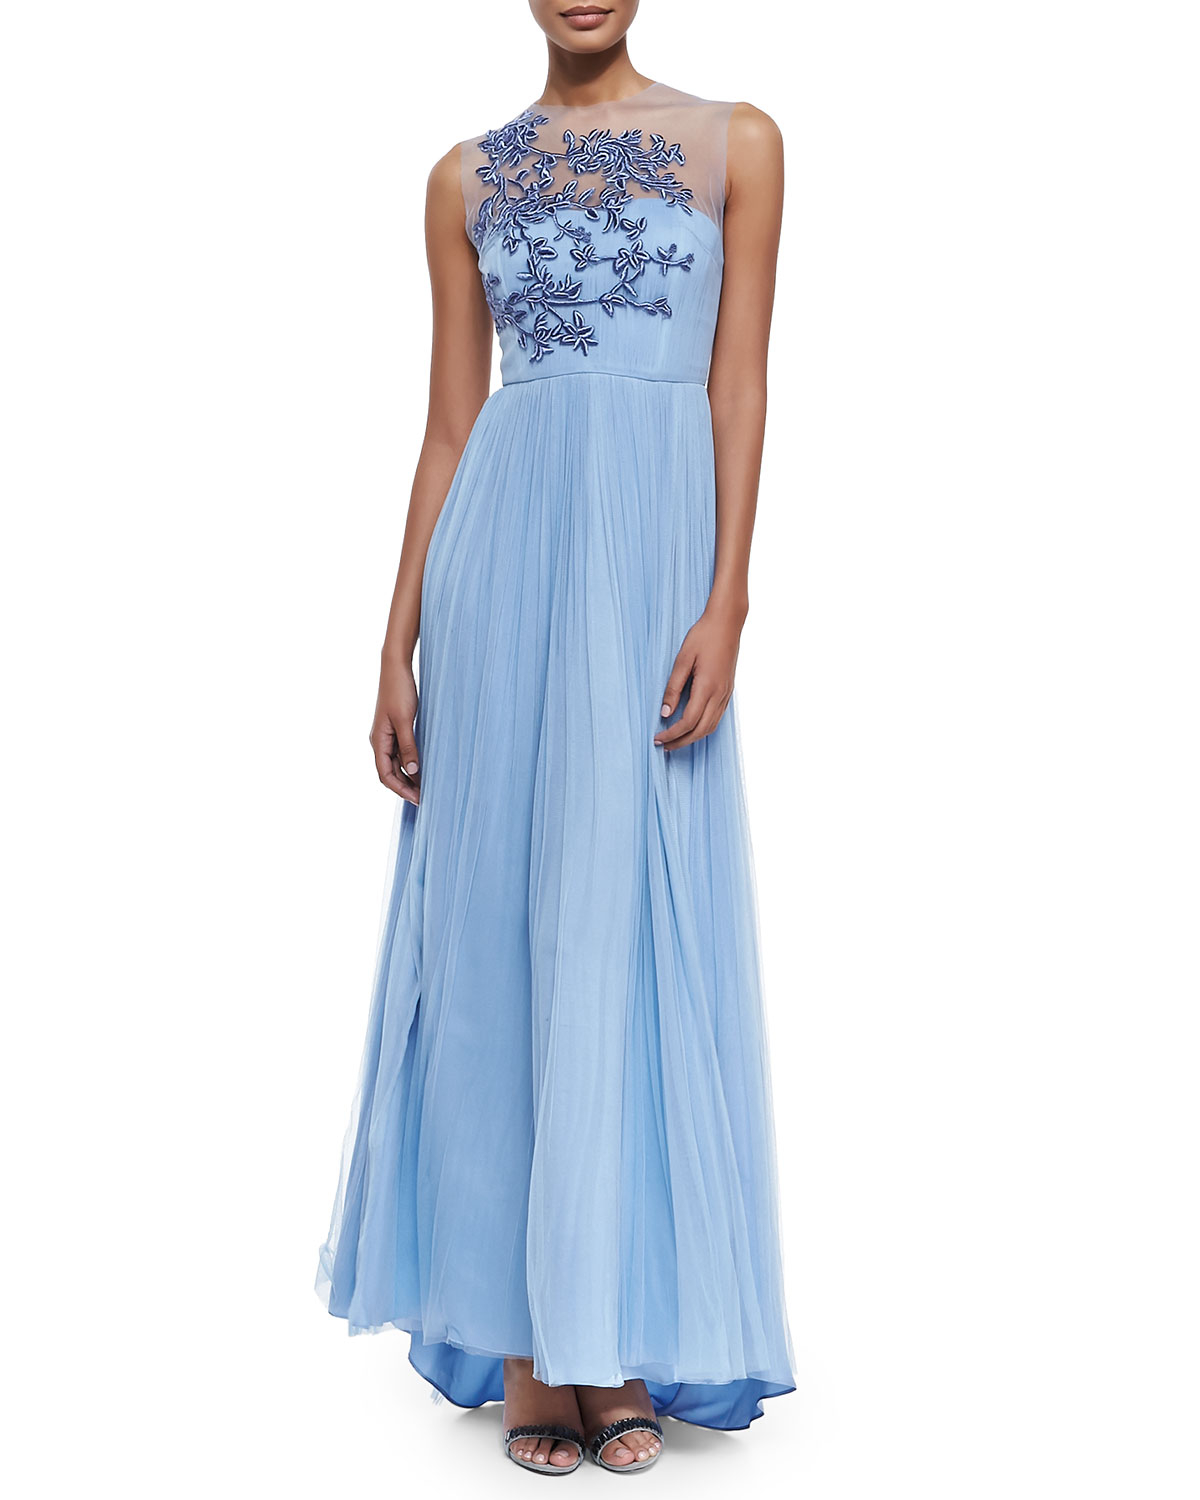 Catherine deane Leticia Sleeveless Embroidered-bodice Gown in Blue ...